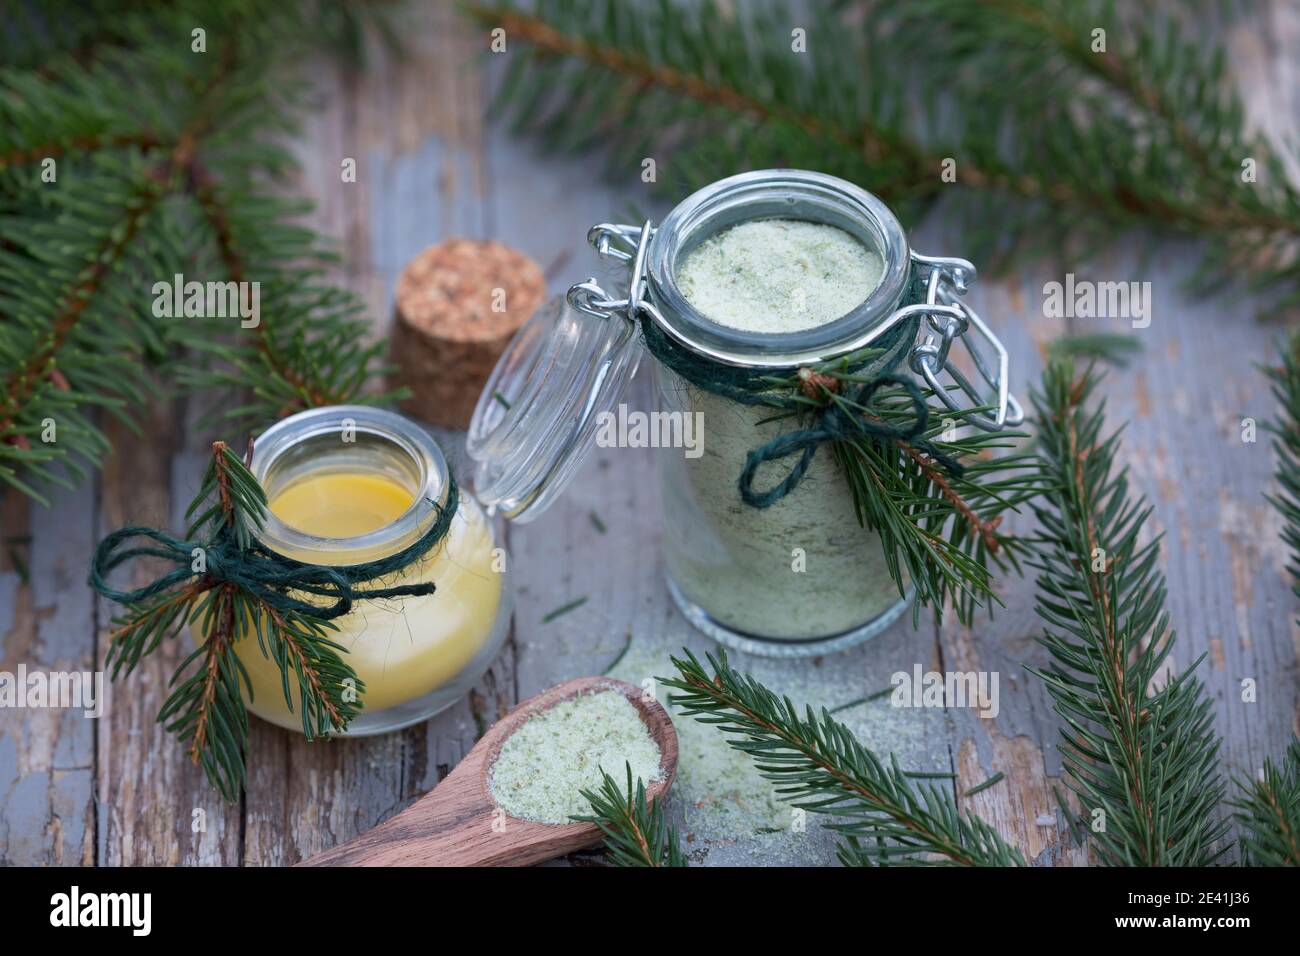 Norway spruce (Picea abies), selfmade products with spruce needles, spruce salt and creme, made of olive oil and beeswax, Germany Stock Photo